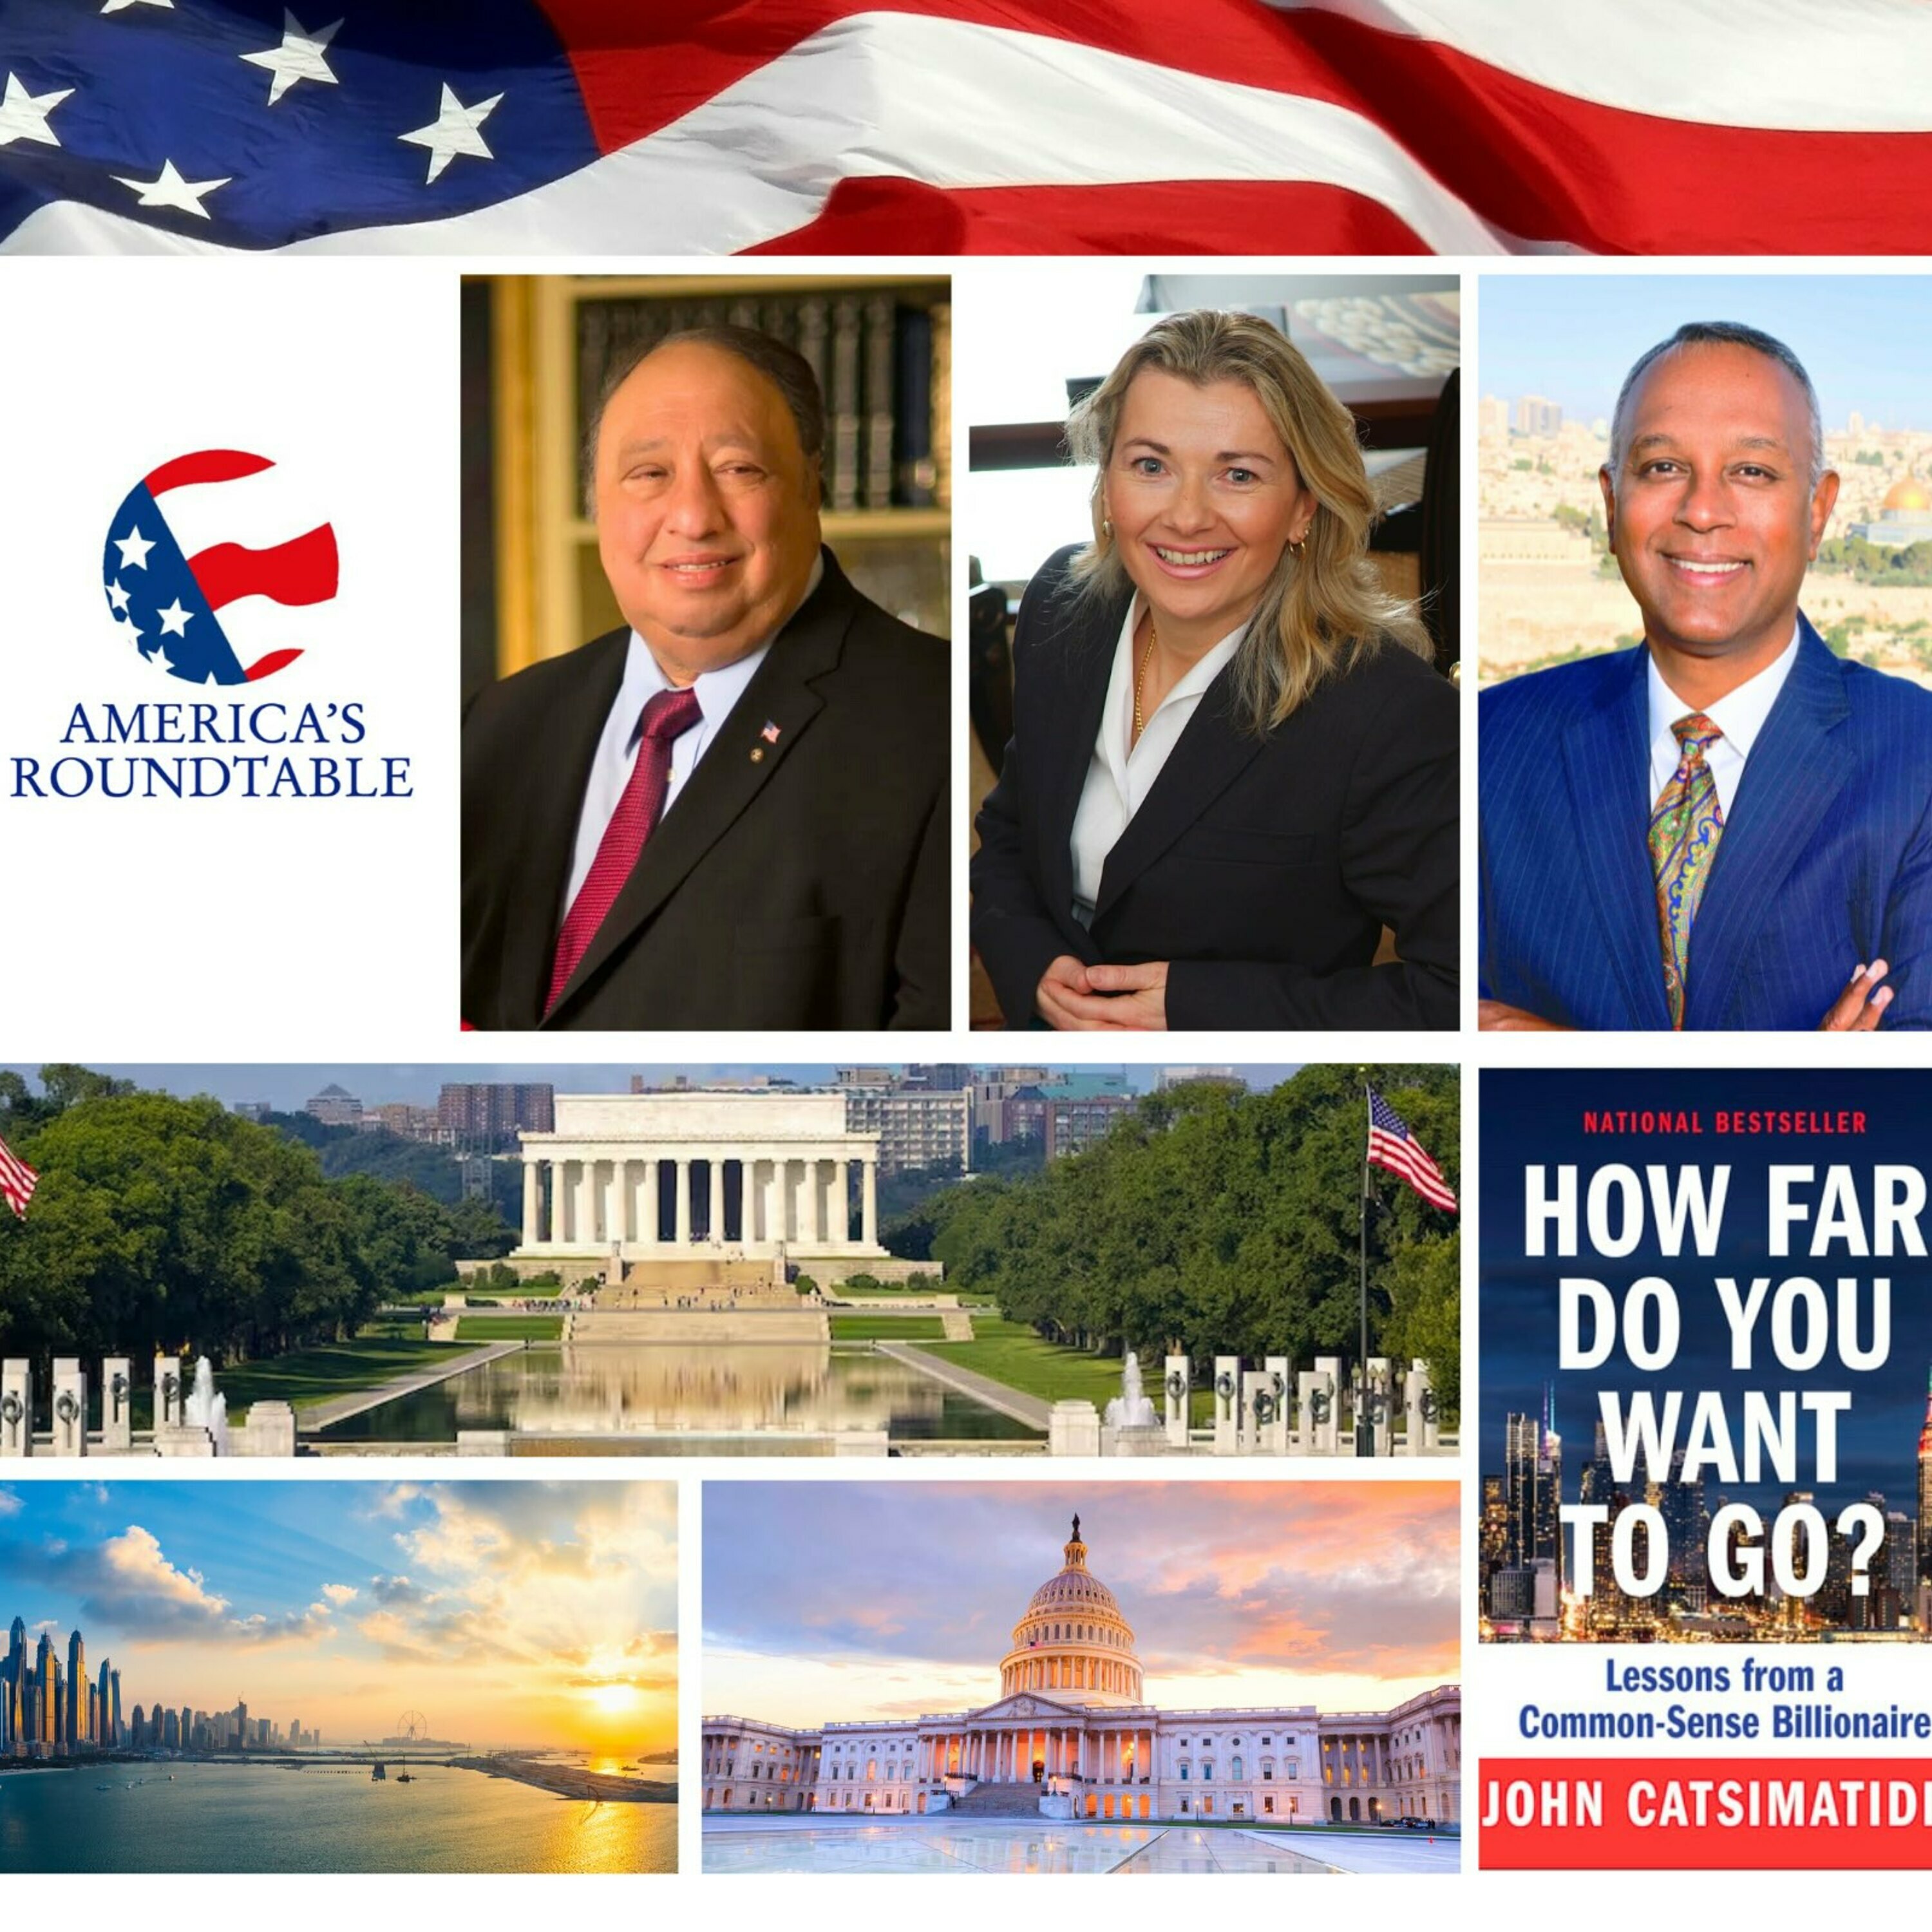 America's Roundtable with Billionaire Entrepreneur John Catsimatidis | Author: "How Far Do You Want to Go?" | The Future of America — Economy, Energy, Immigration and US Leadership in Foreign Policy